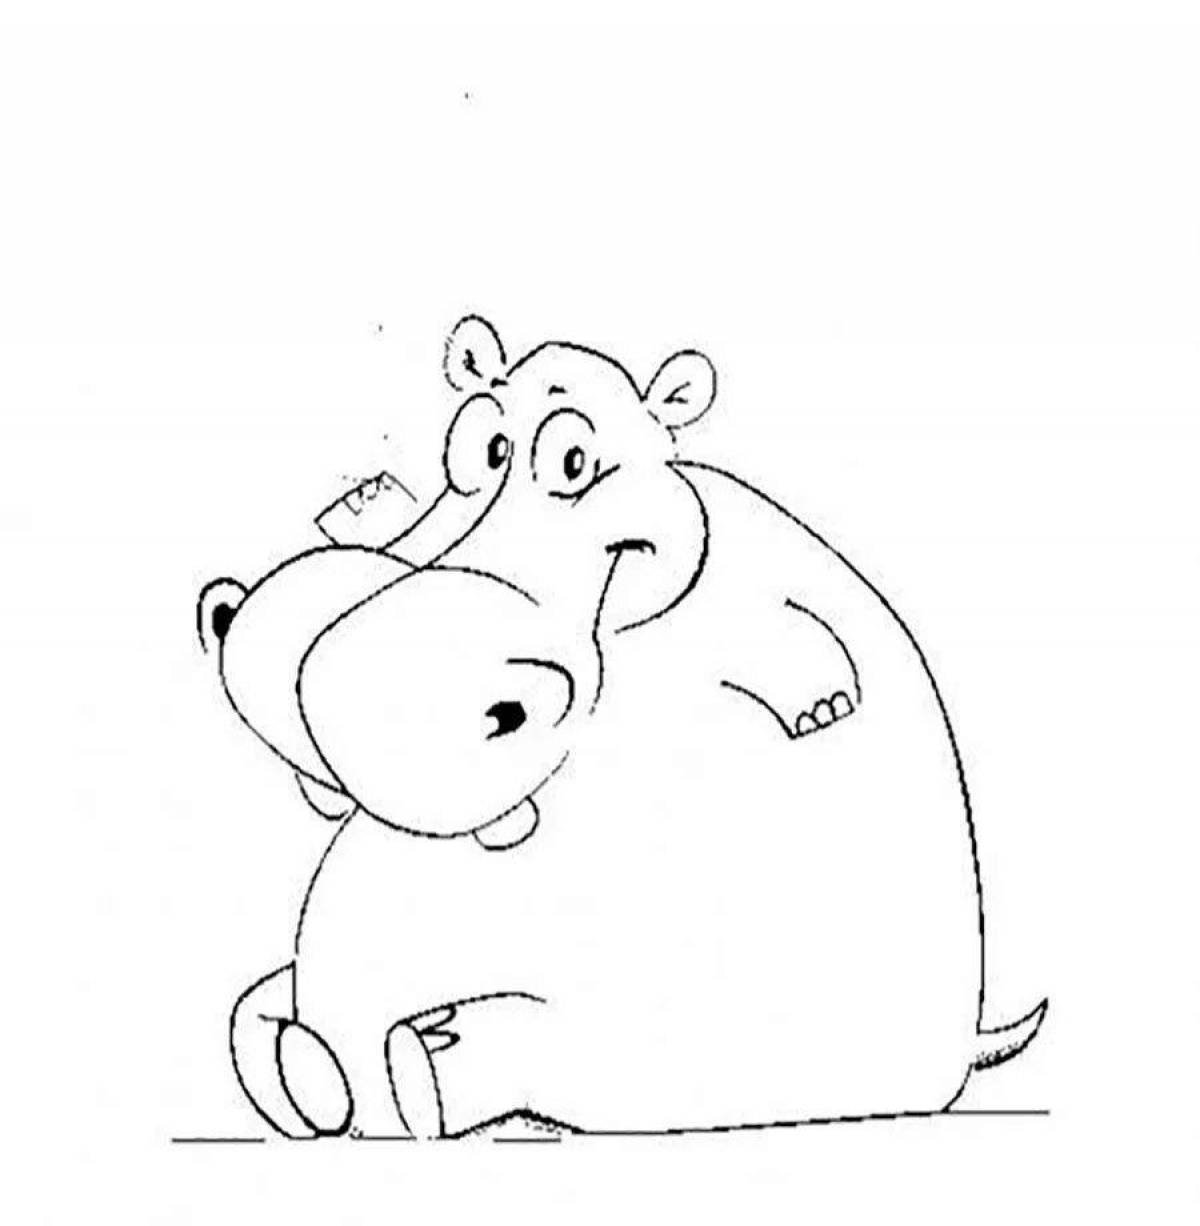 An indecisive hippo who was afraid of vaccinations